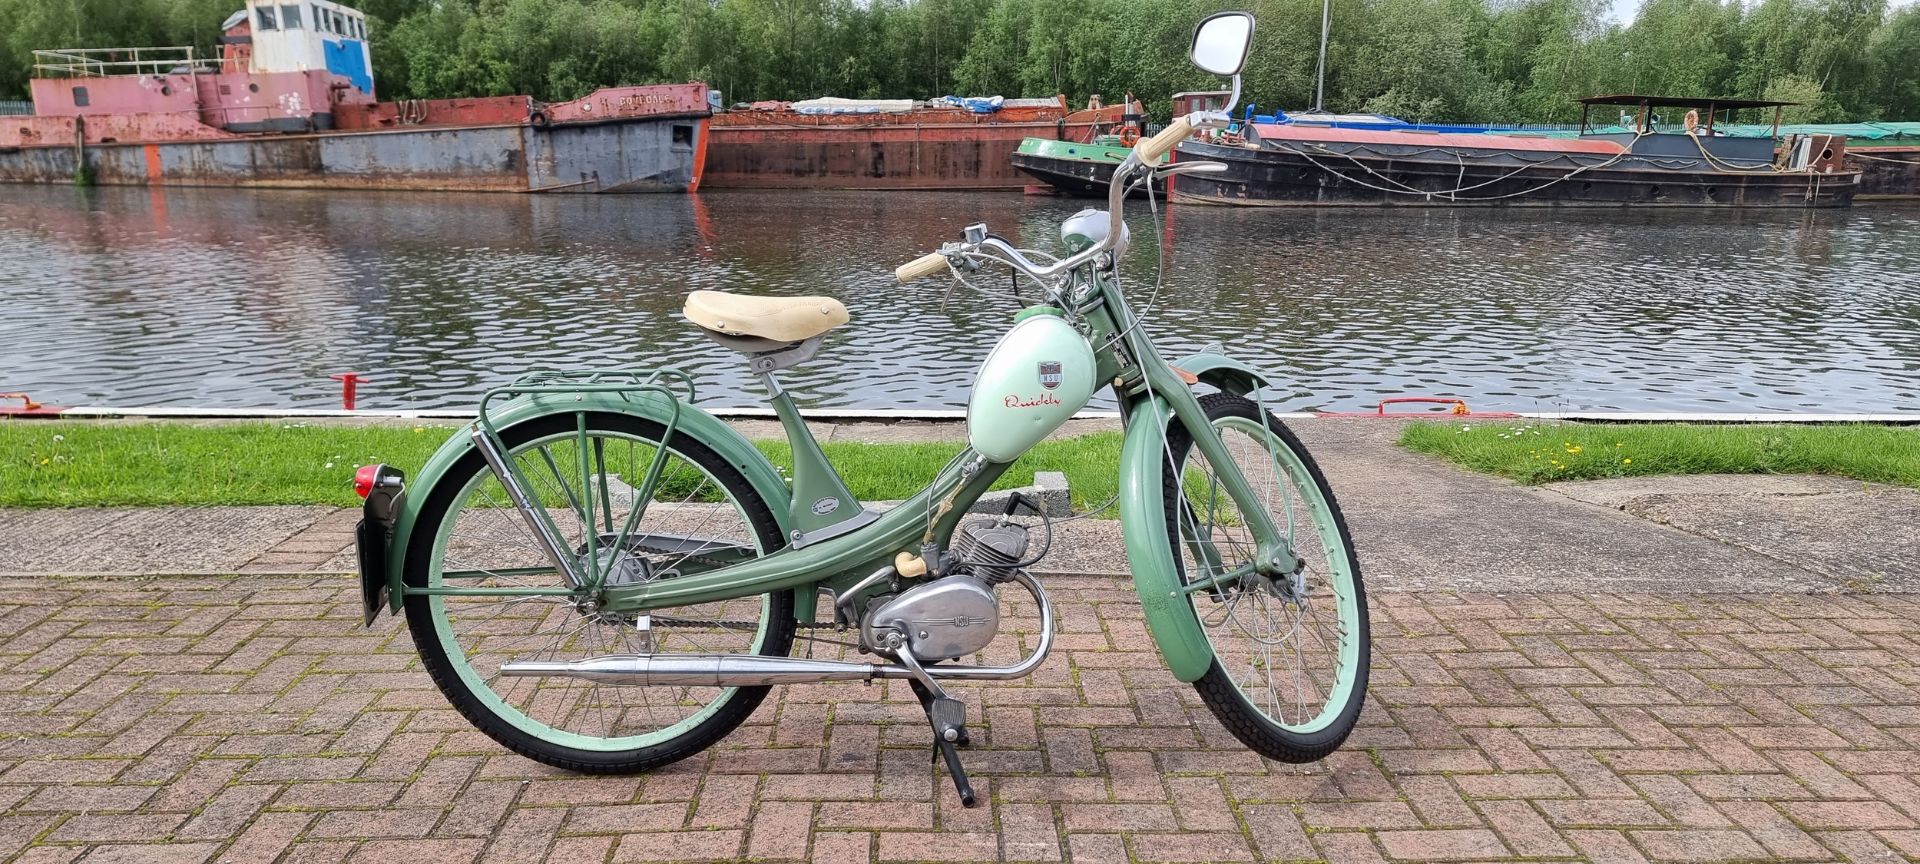 1961 NSU Quickly S, 49cc. Registration number 322 XVC (non transferrable). Frame number 866984.